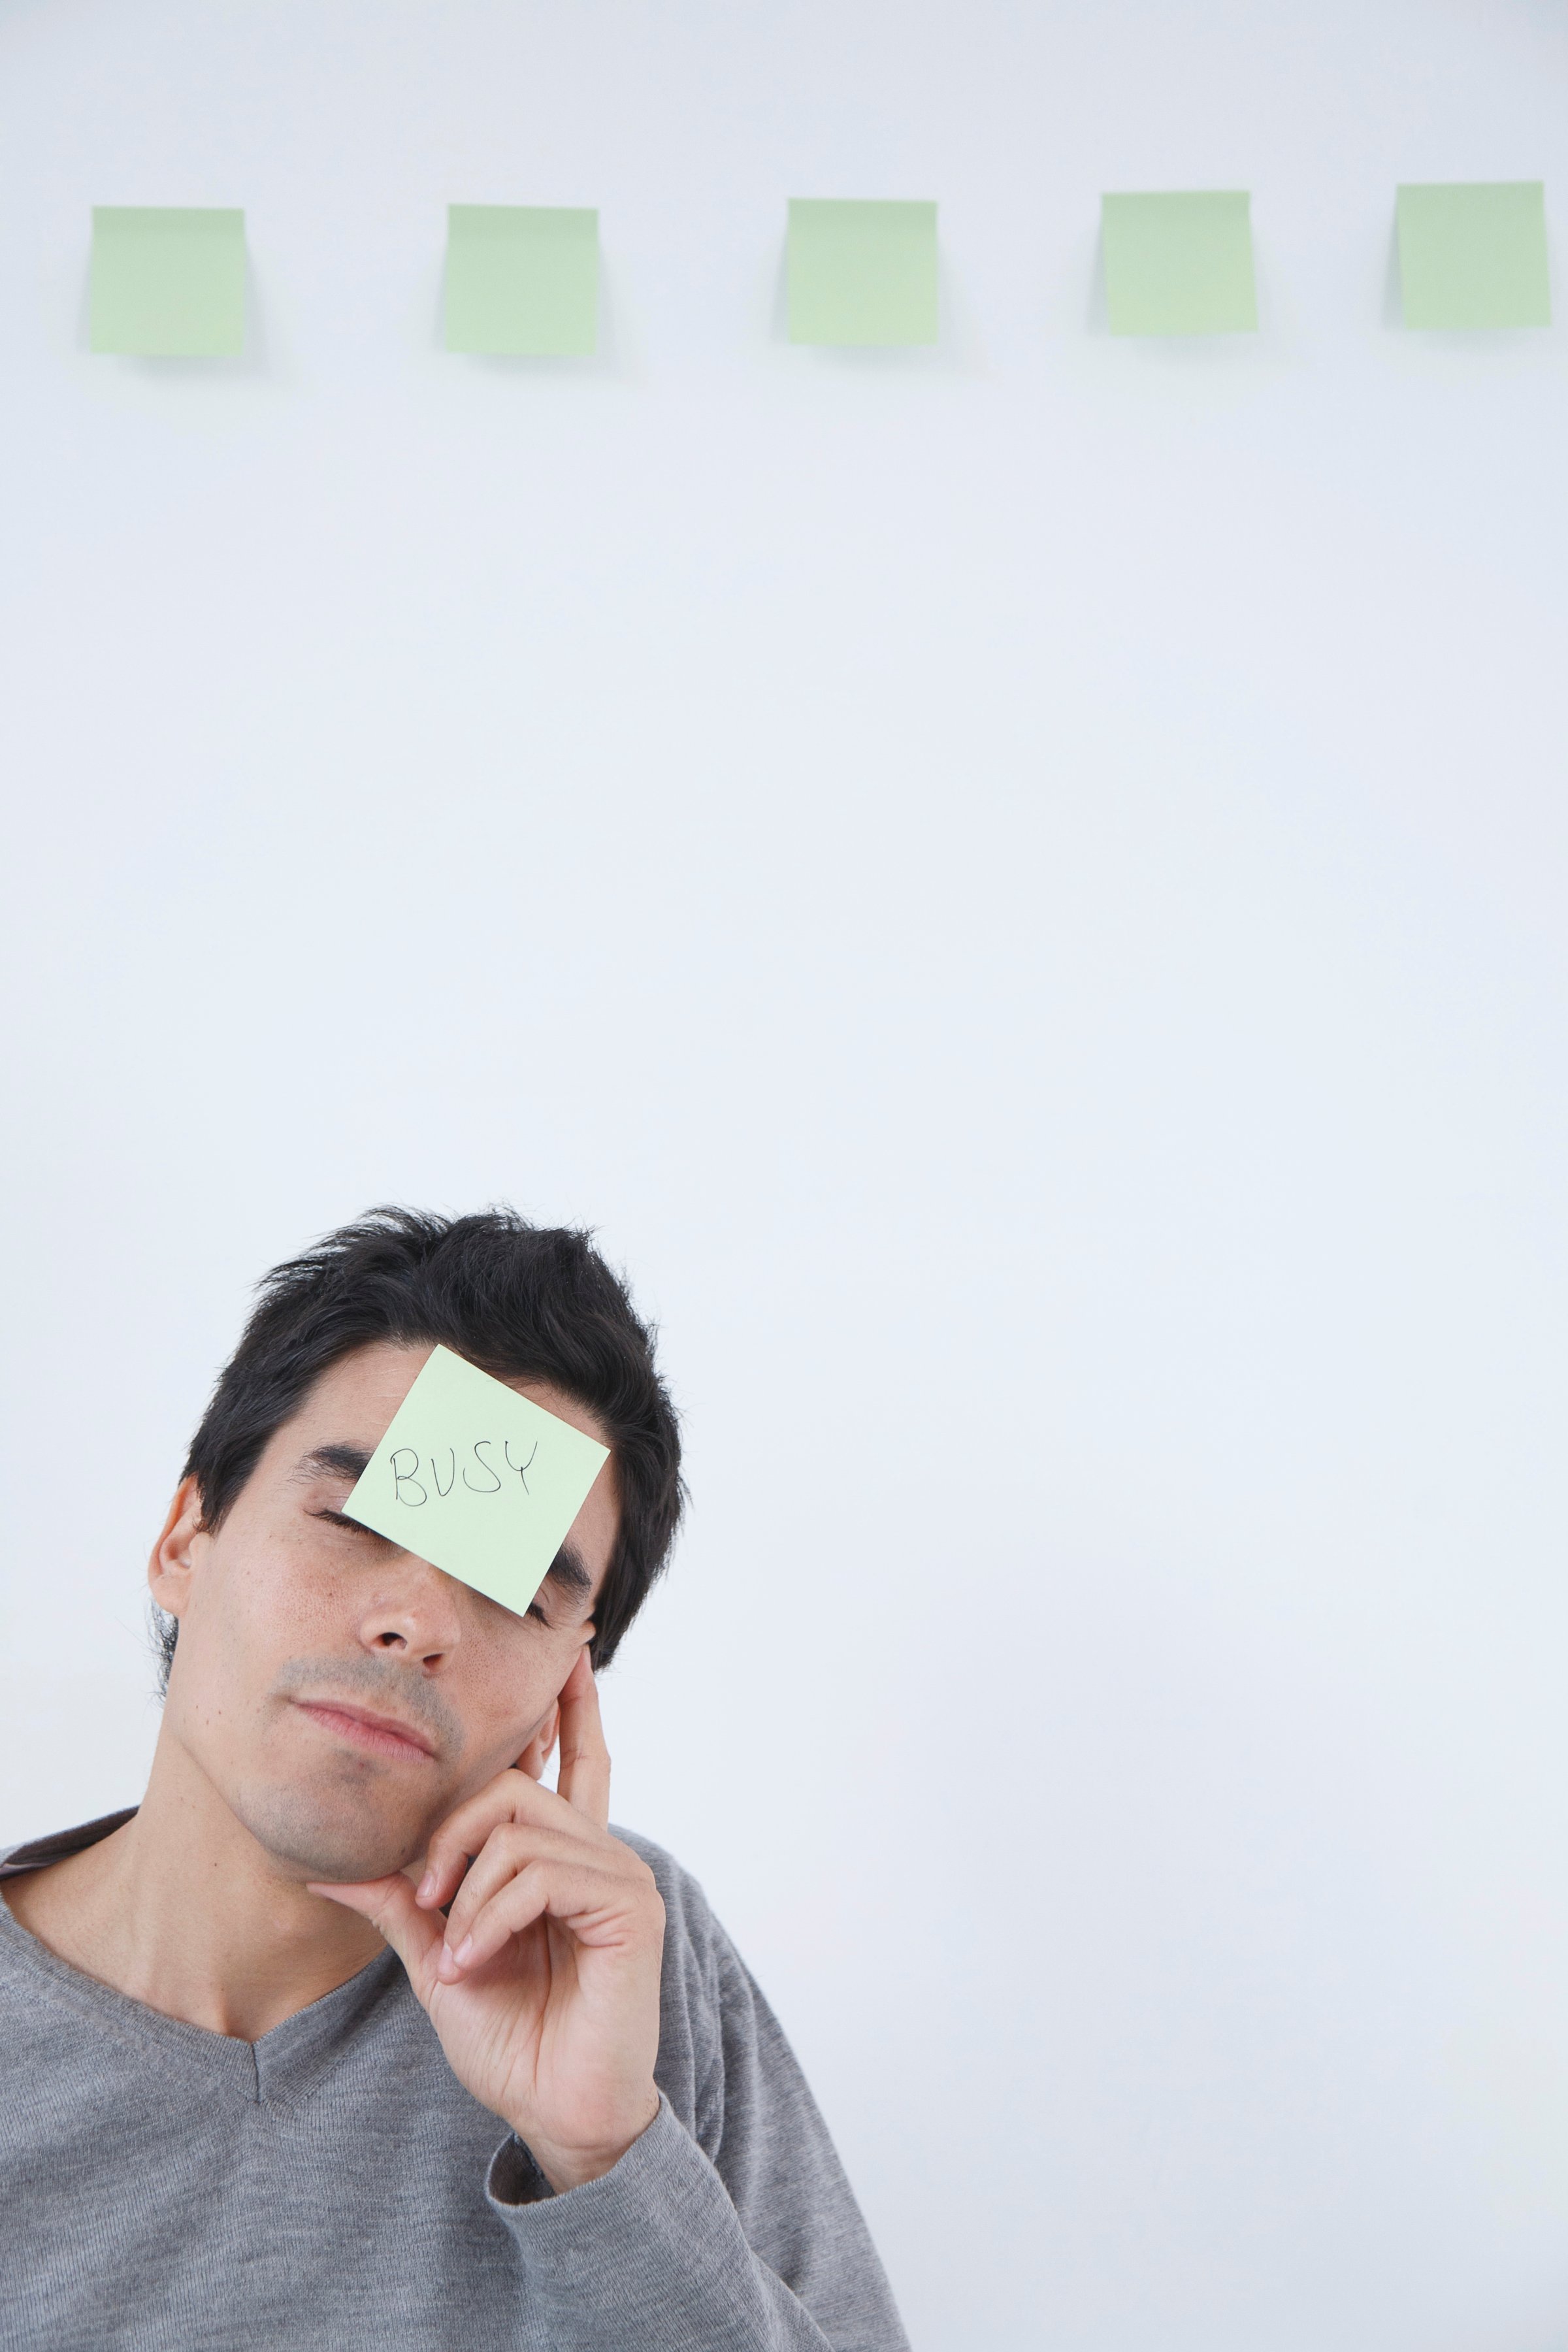 Man with 'busy' post-it note on his head